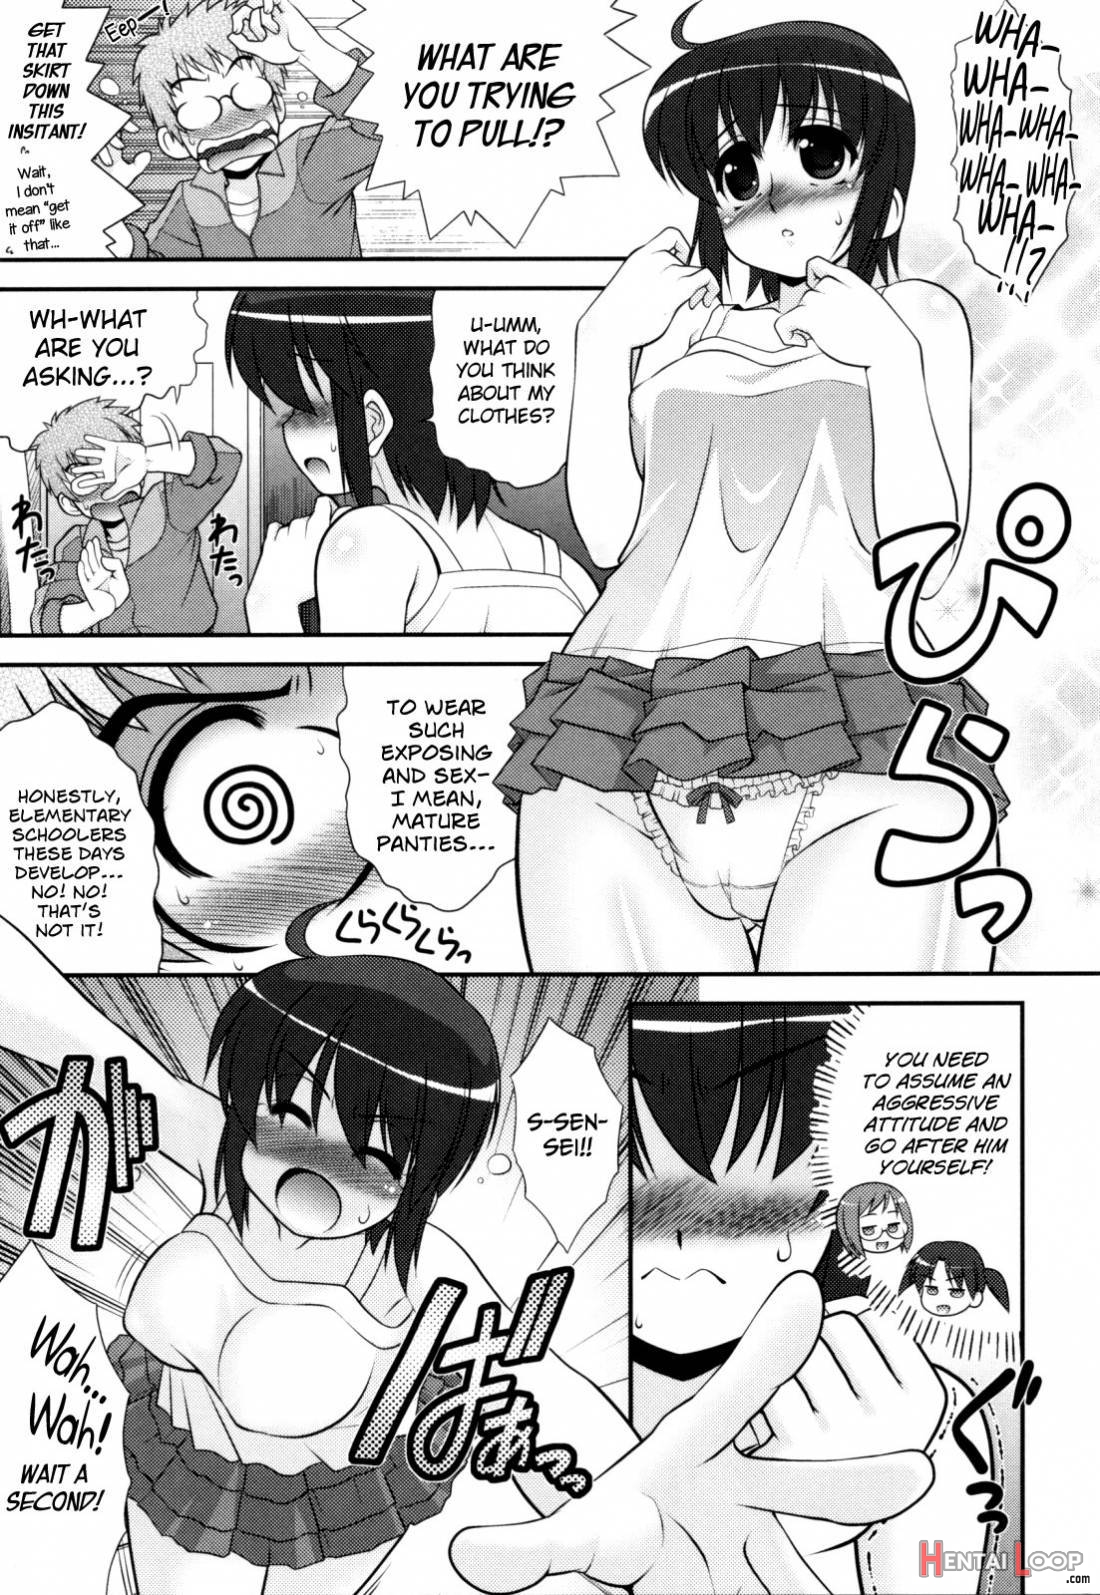 Aoi-chan Attack! page 10